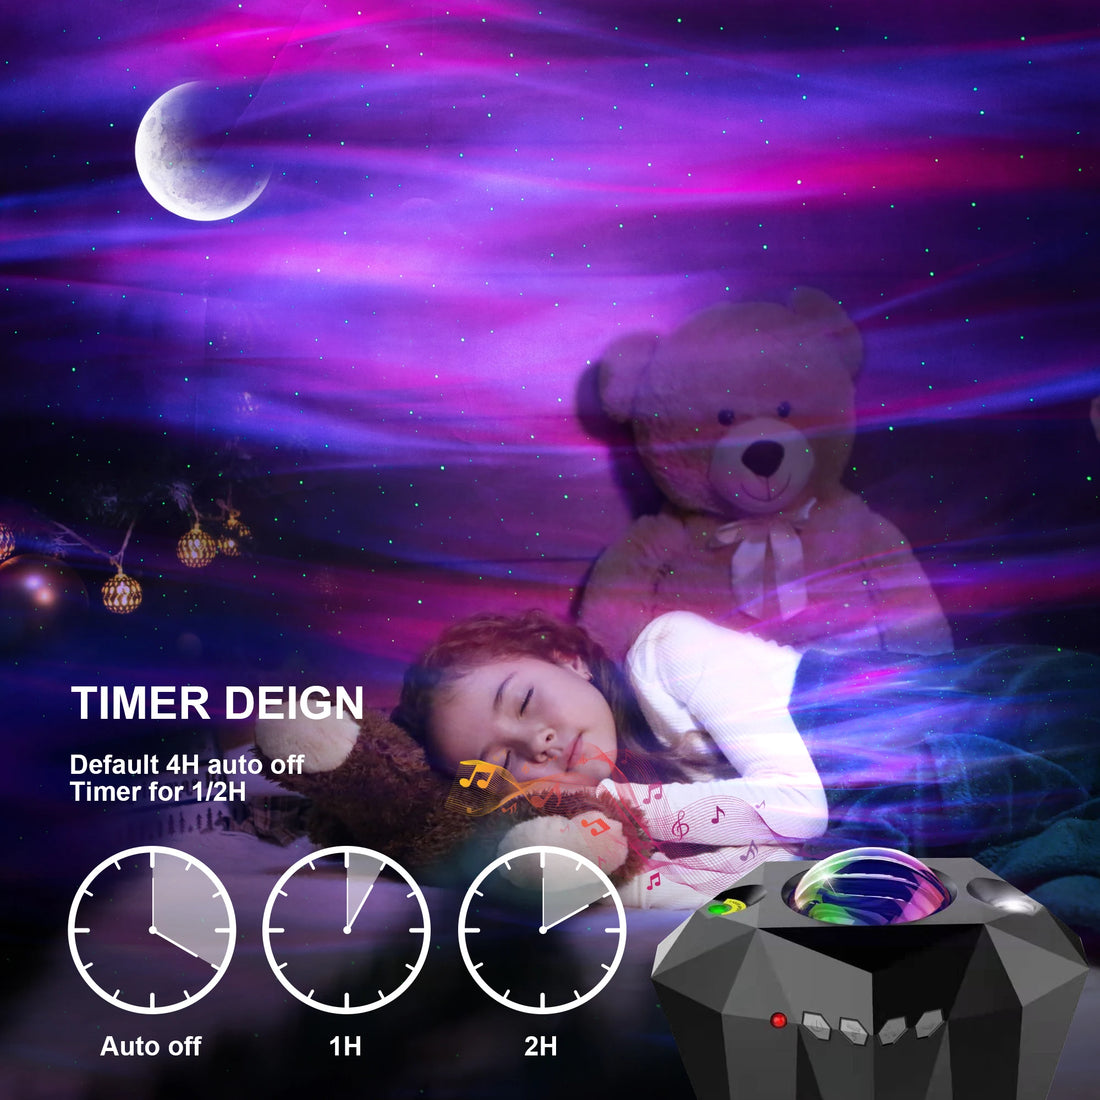 LED Aurora Projector Galaxy Starry Sky Projector Lamp Northern Lights Bedroom Home Room Decoration Nightlights Luminaires Gift